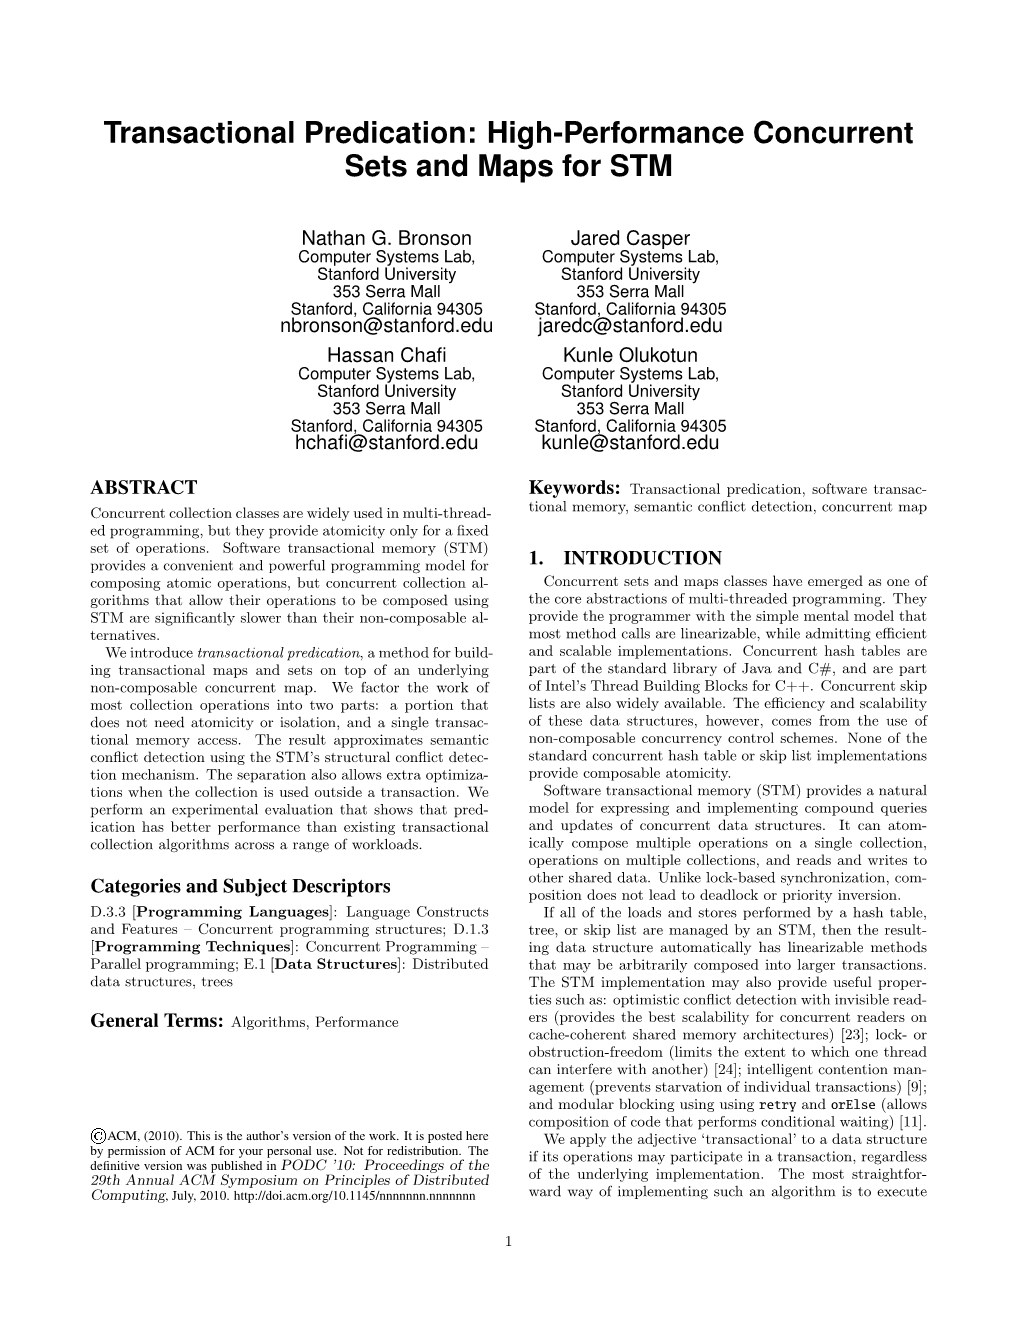 Transactional Predication: High-Performance Concurrent Sets and Maps for STM